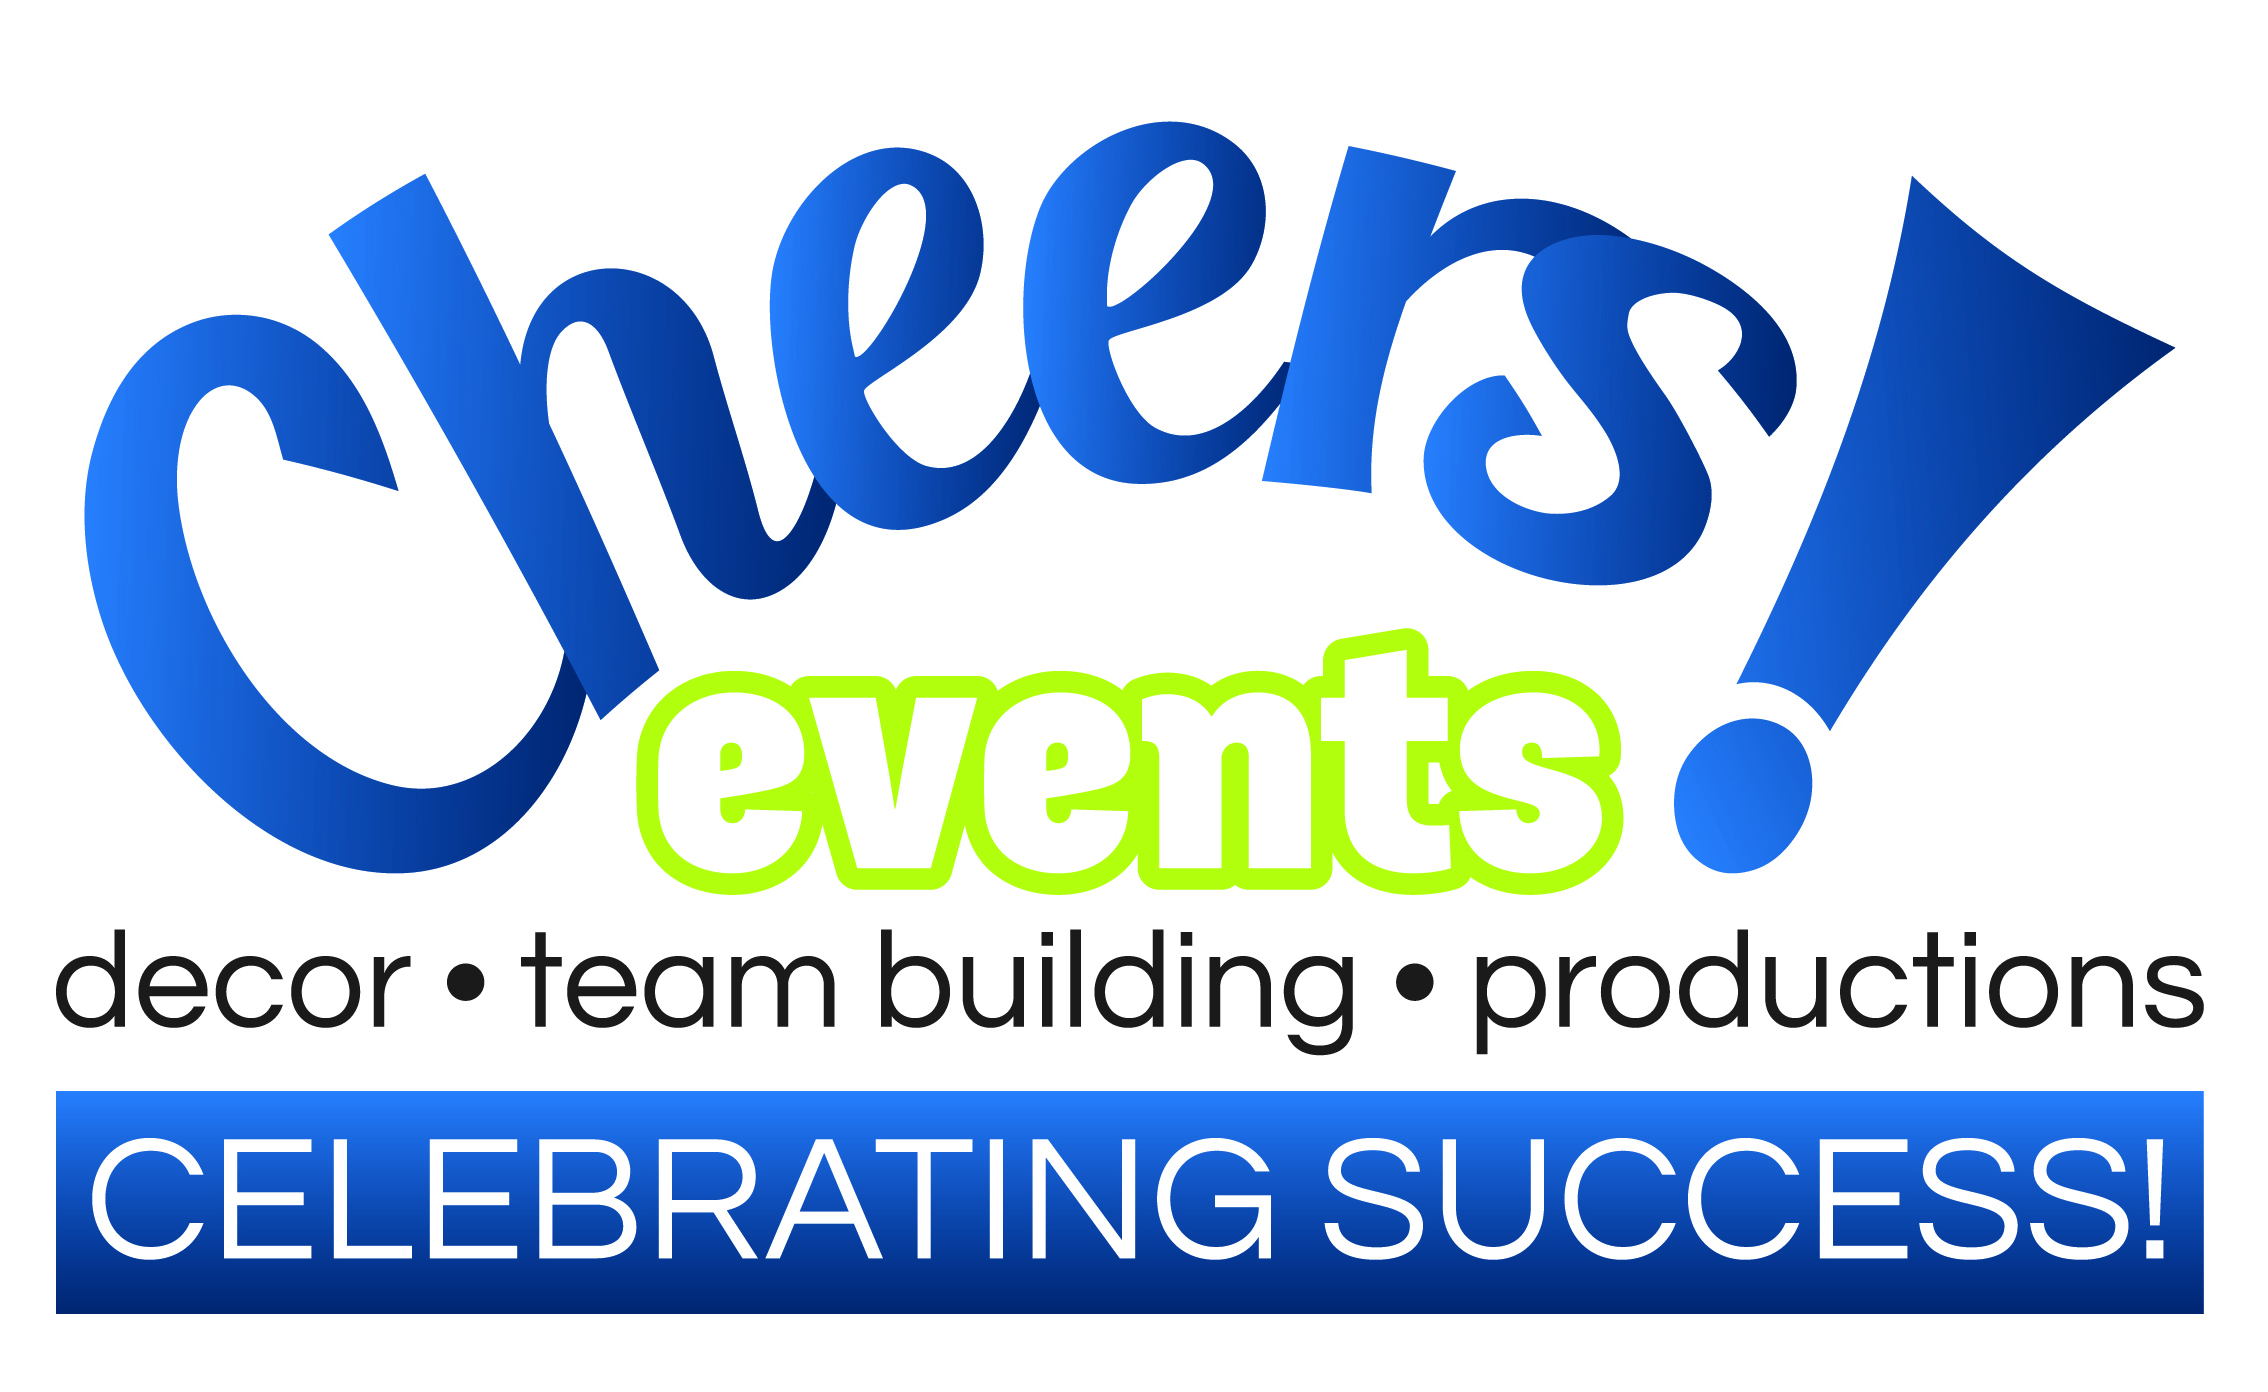 Cheers! Events